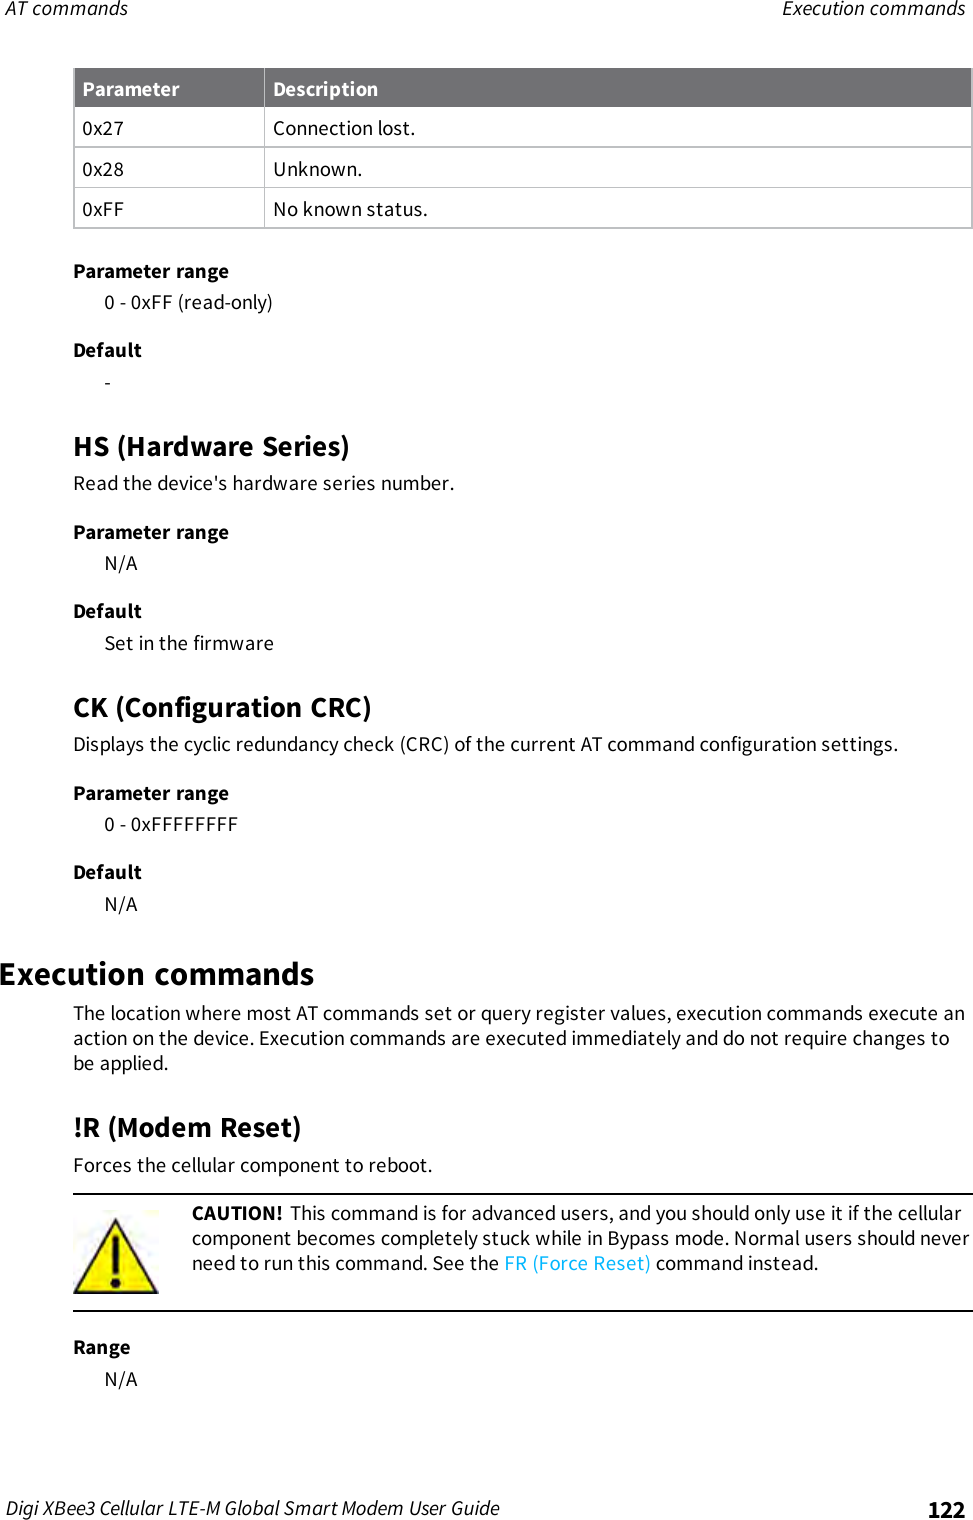 Page 122 of Digi XB3M1 XBee3 Cellular LTE-M User Manual 